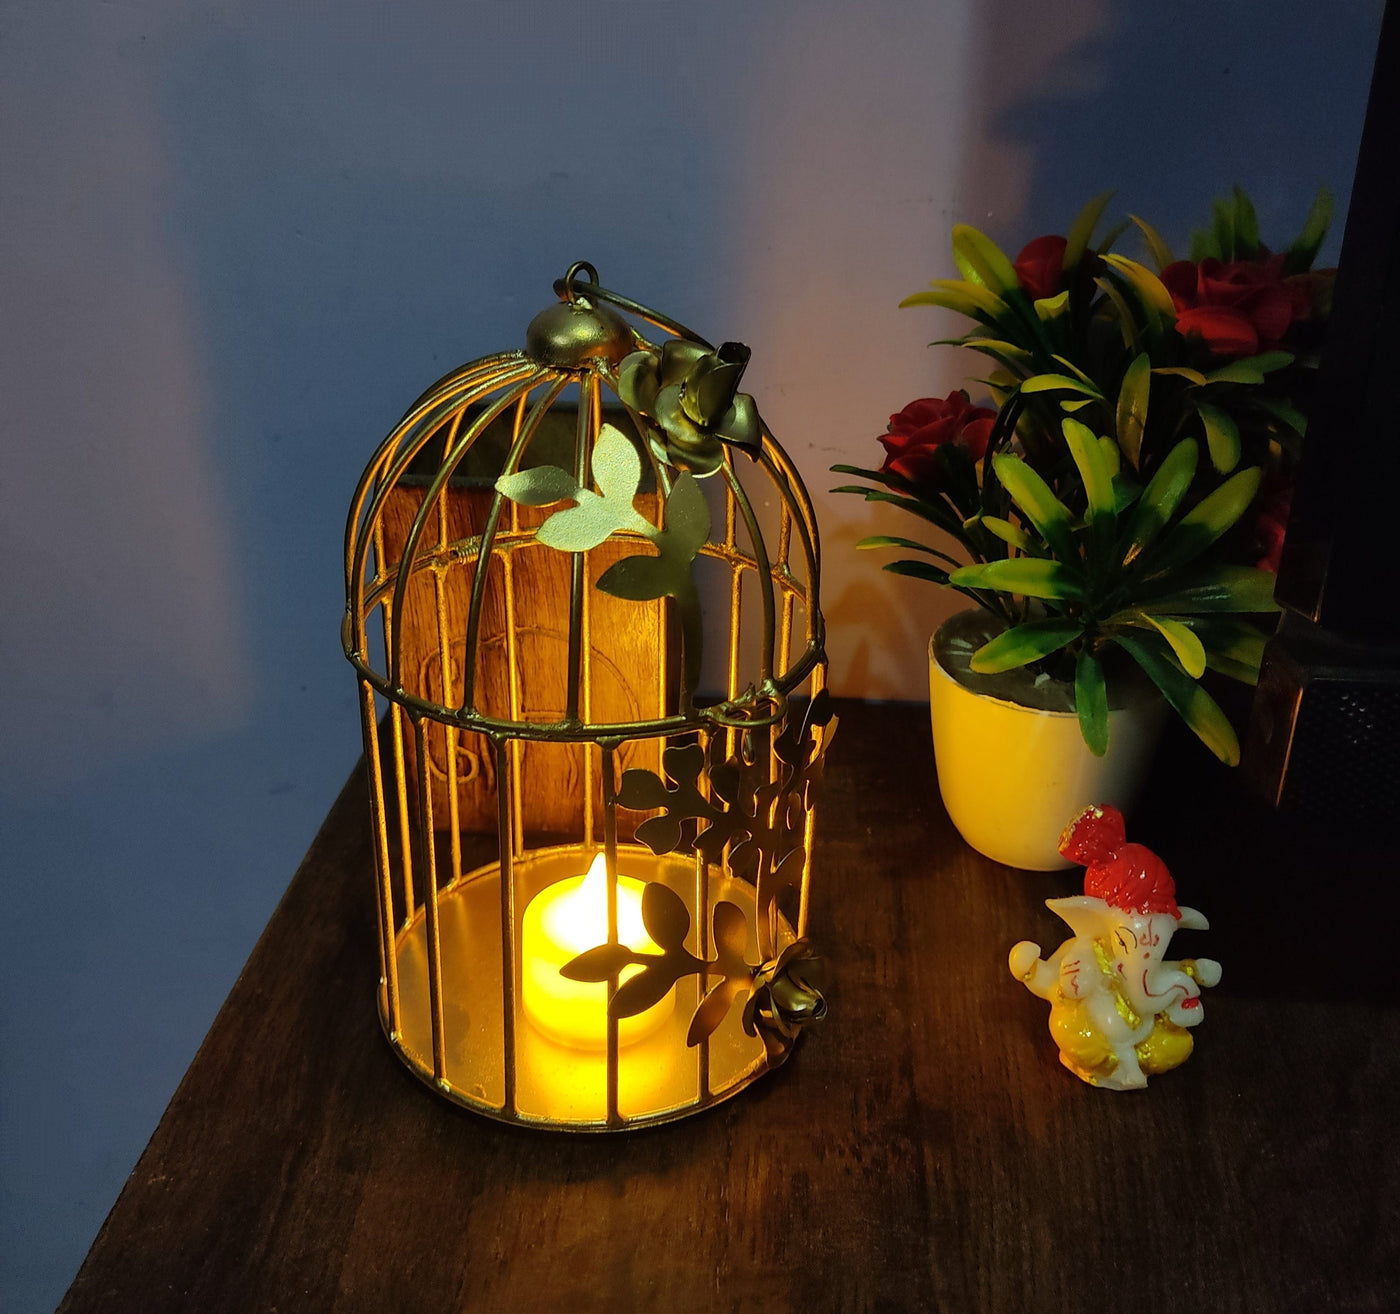 Lamansh LAMANSH Iron Metal Cage Candle Holder for Festive ✨ Home & Event Decoration / Floral 🌺 work Metal Handcrafted Diya Stand for Xmas 🎄 & Diwali decor